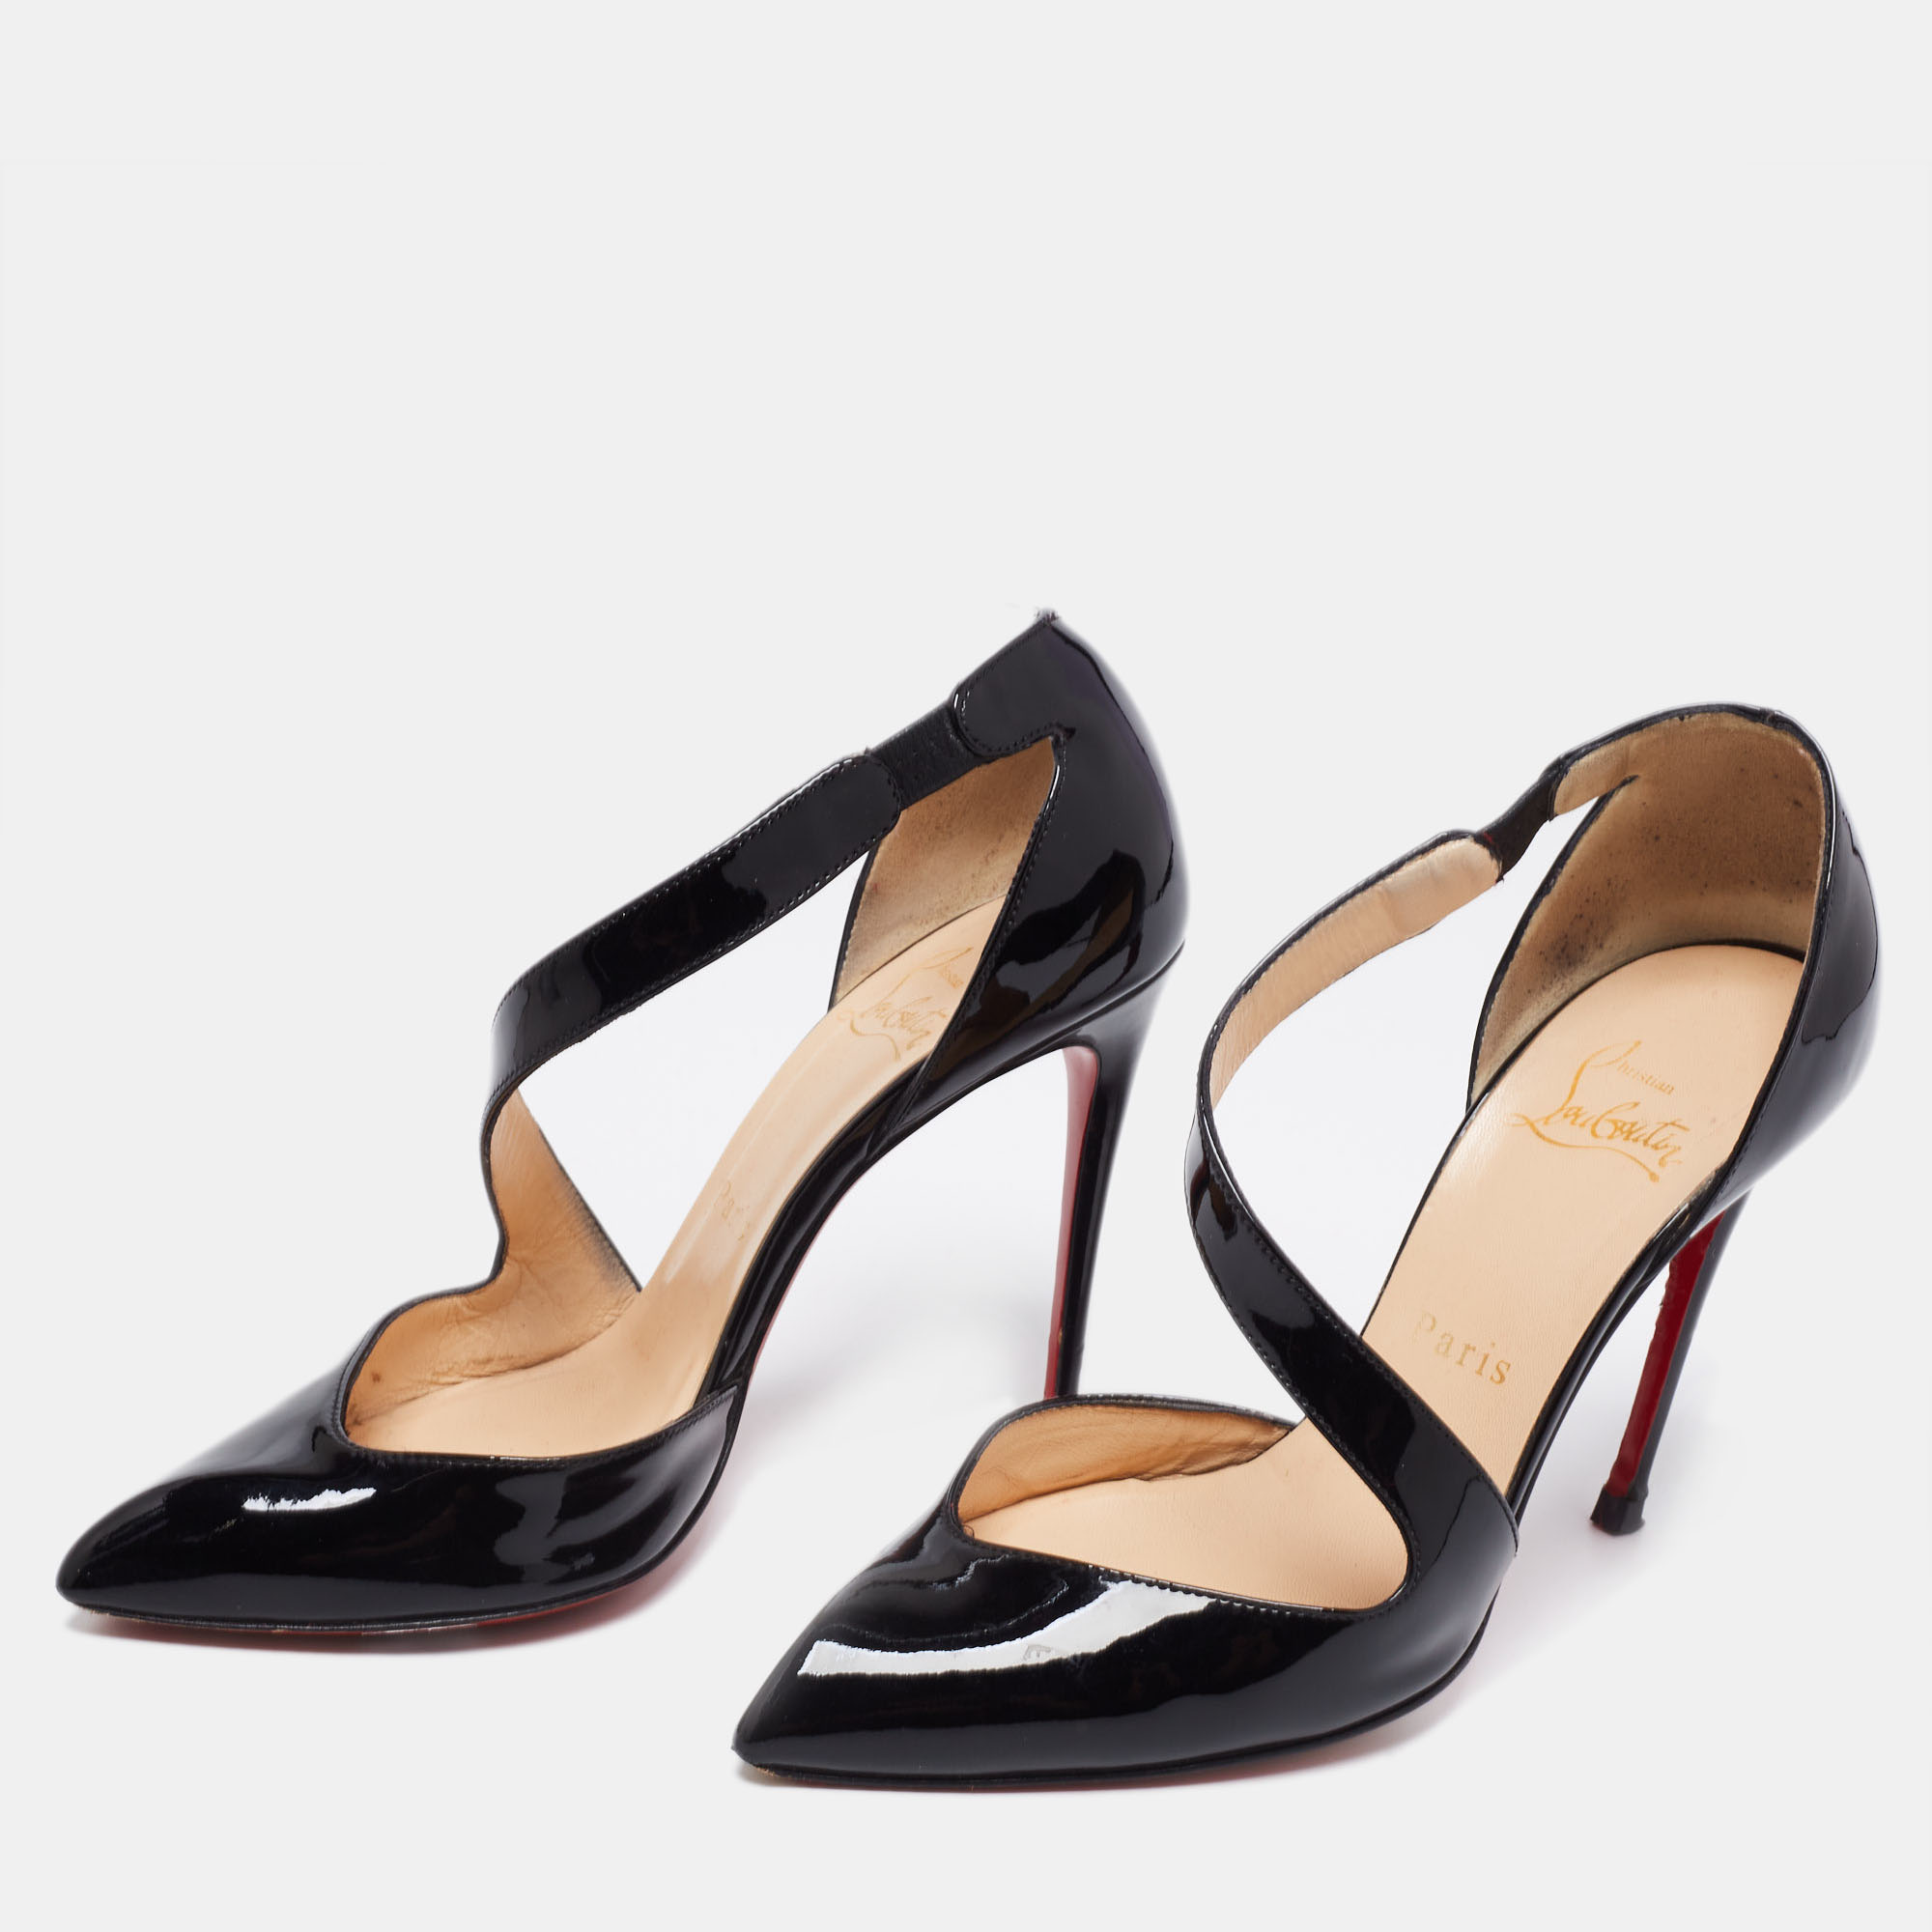 

Christian Louboutin Black Patent Leather Opgrade Cross Strap Pumps Size